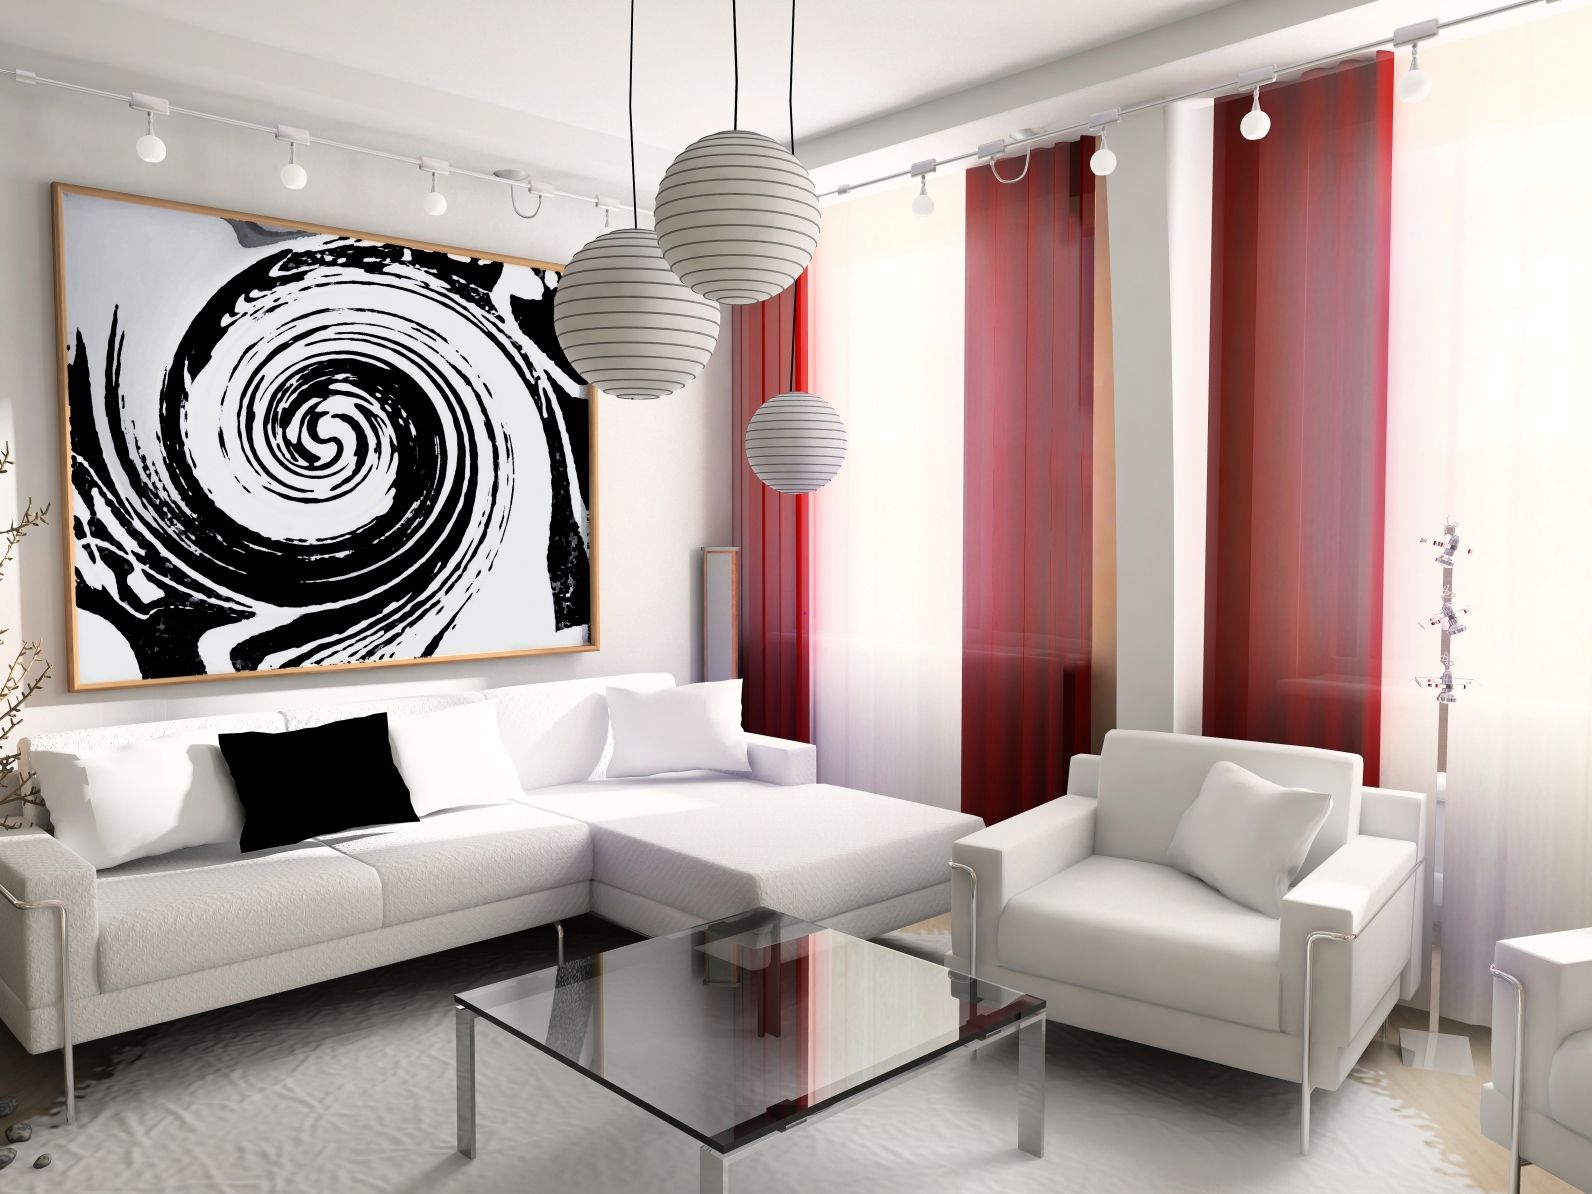 Painting Wall Living Winsome Painting Wall For White Living Room Ideas With Couch Under Unique Floating Lamps Living Room White Living Room Ideas With Calm And Relaxing Nuance